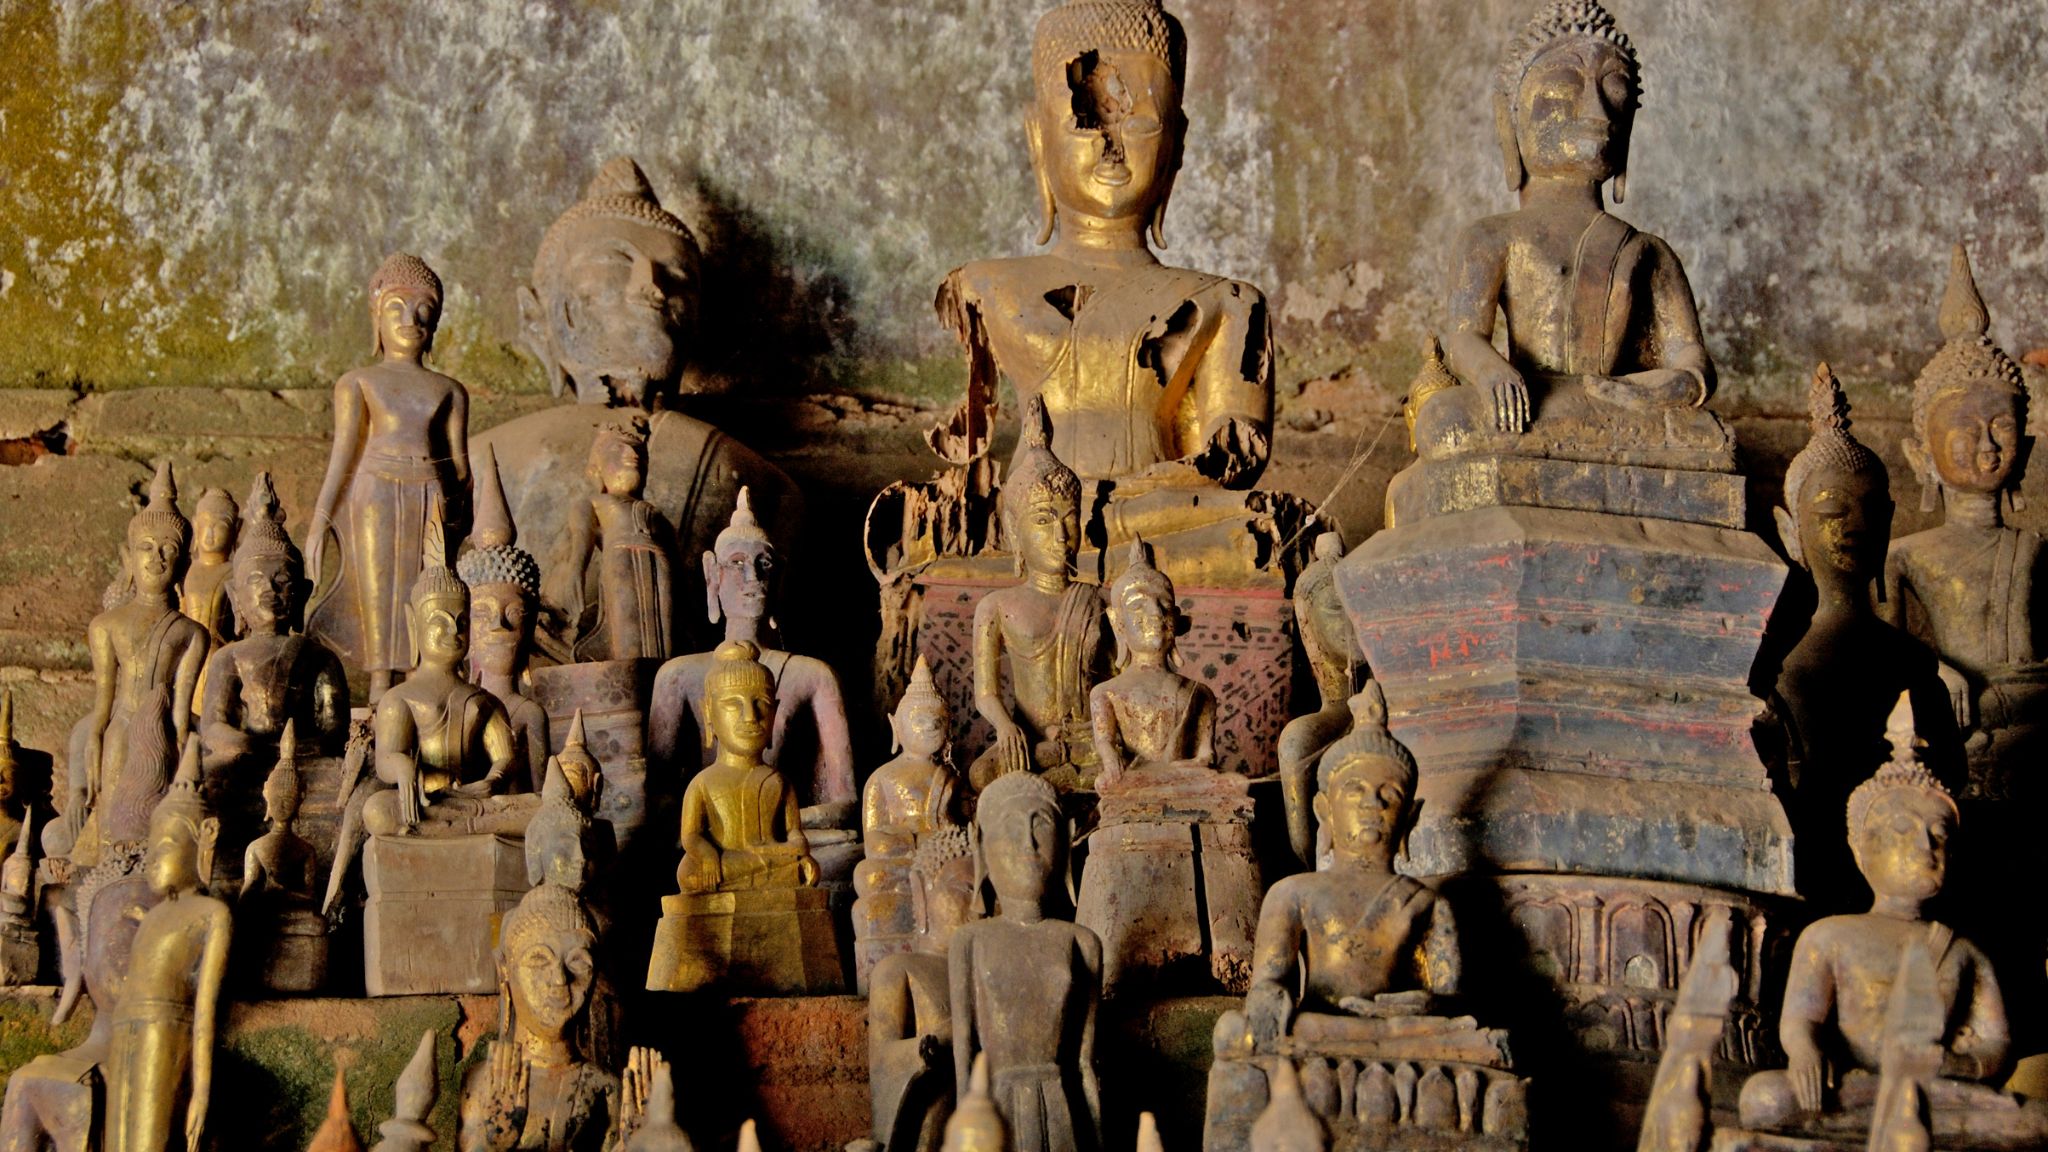 Day 3 Admire Thousands Of Incredible Carved Statues In Pak Ou Caves